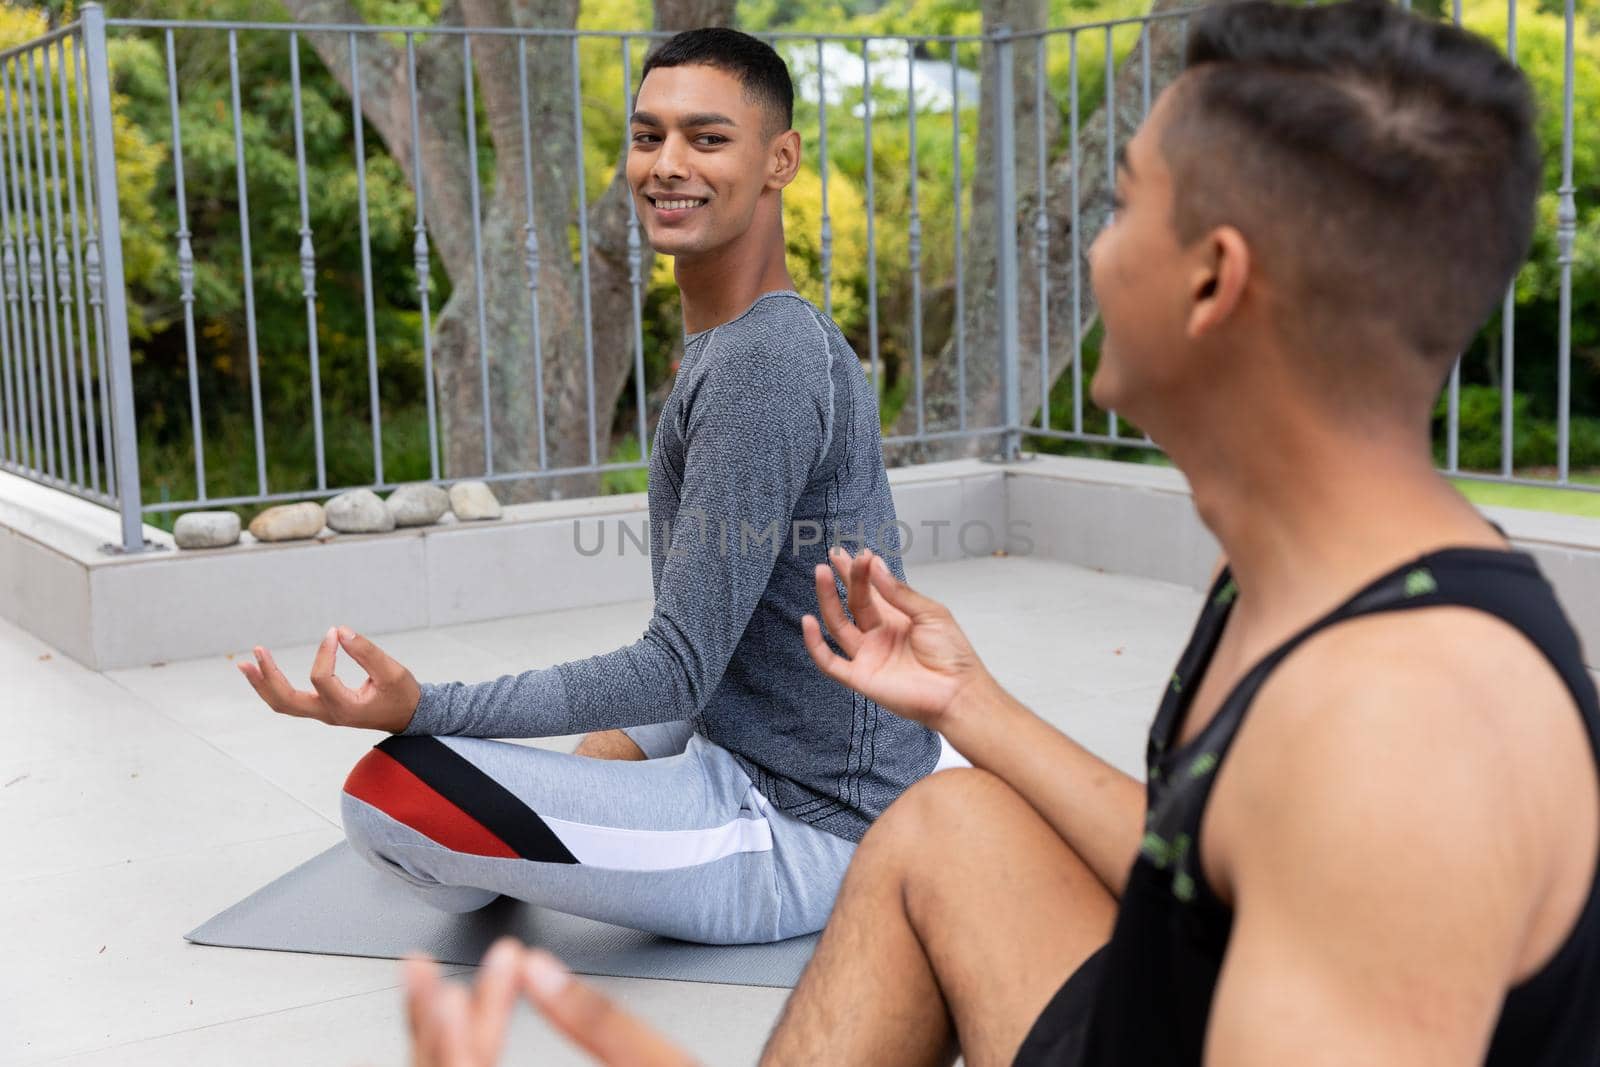 Diverse gay male couple practicing yoga meditating and smiling on balcony. staying at home in isolation during quarantine lockdown.